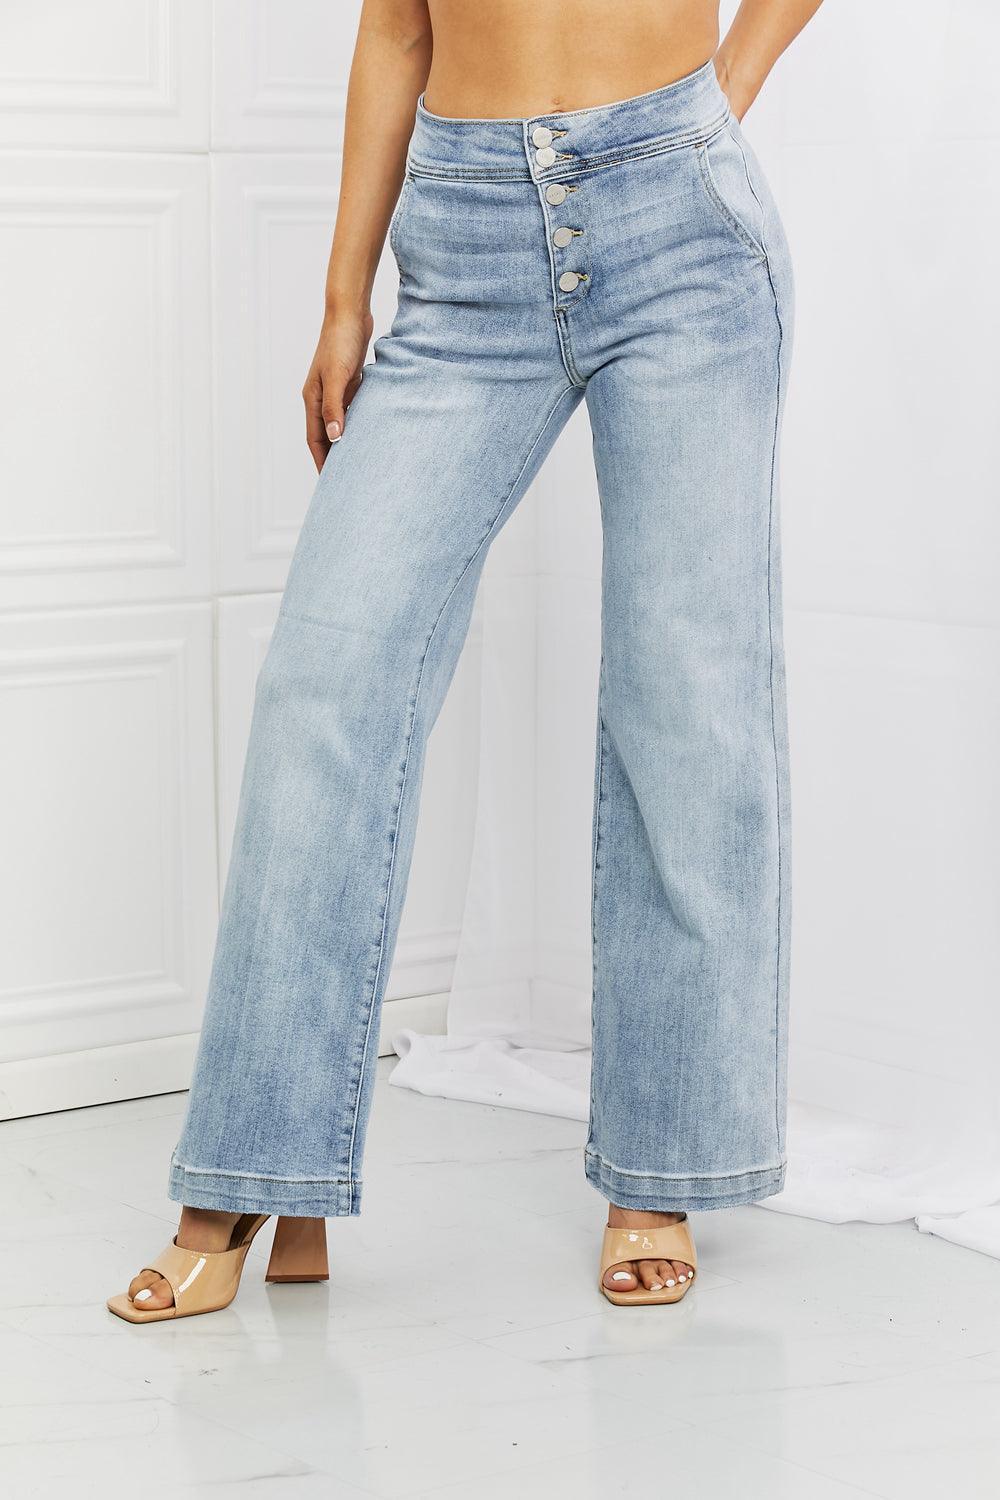 Chill Mode High Rise Wide Leg Button Fly Jeans - MXSTUDIO.COM